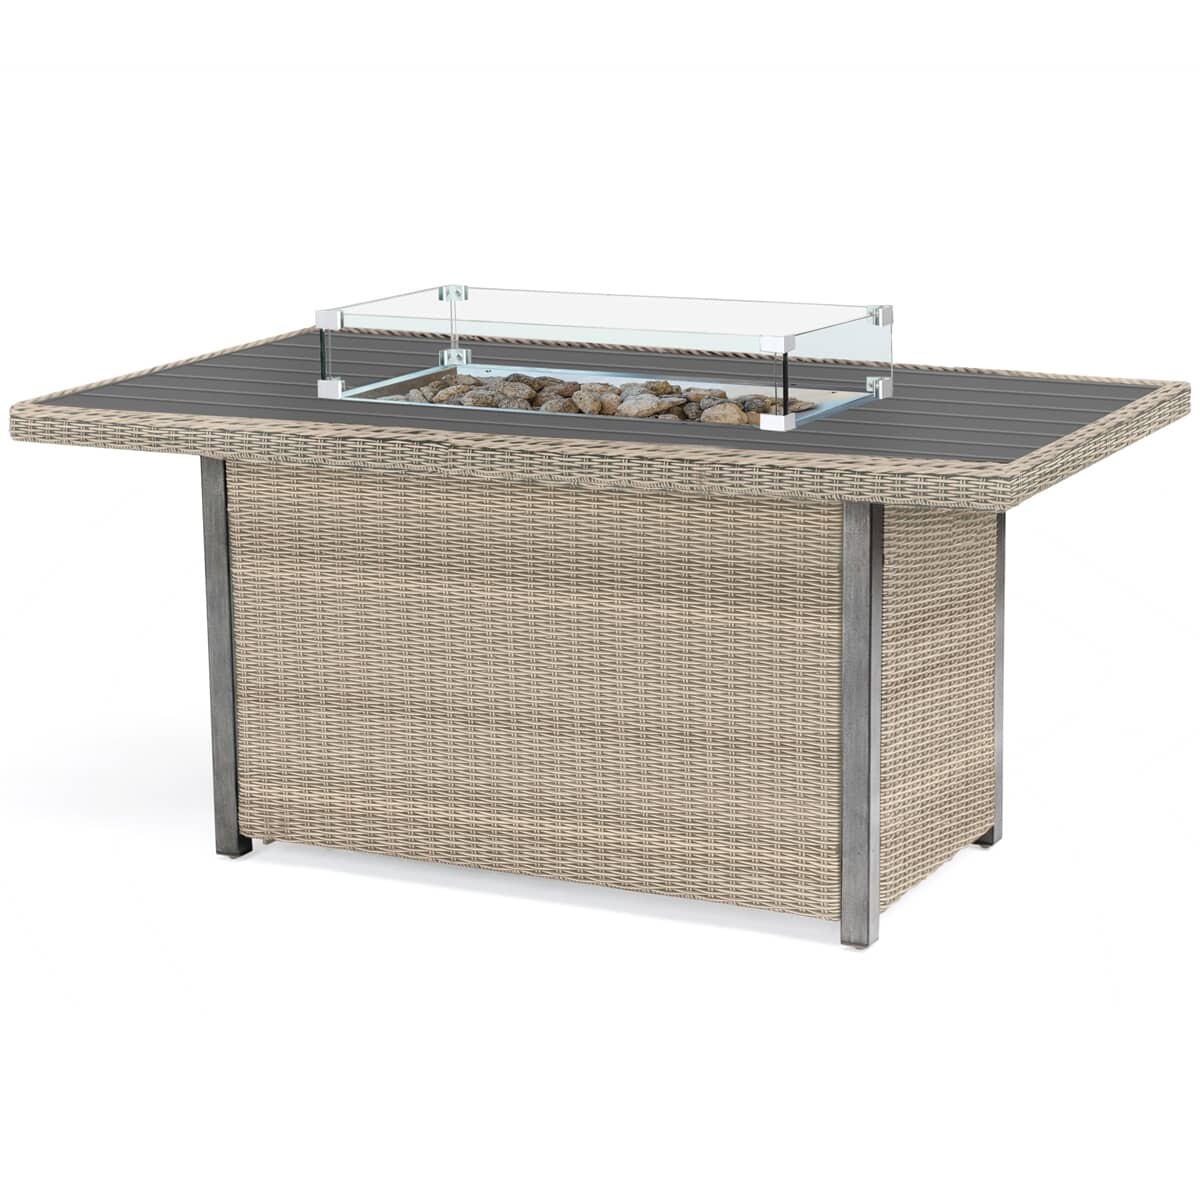 Kettler Palma Fire Pit Table Oyster with Aluminium Slat Top